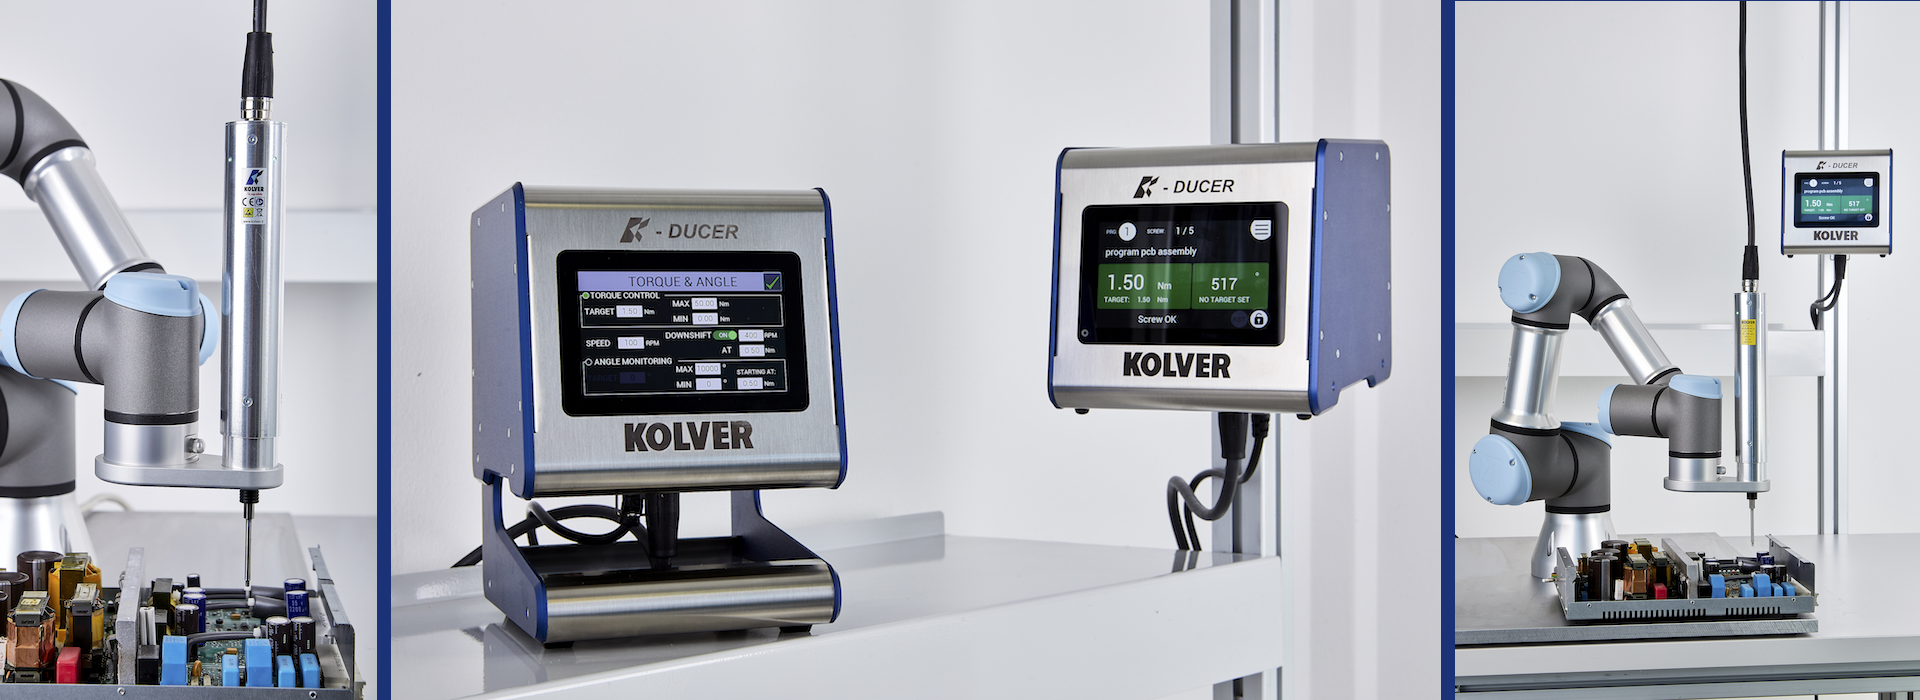 Kolver electric screwdrivers with torque control